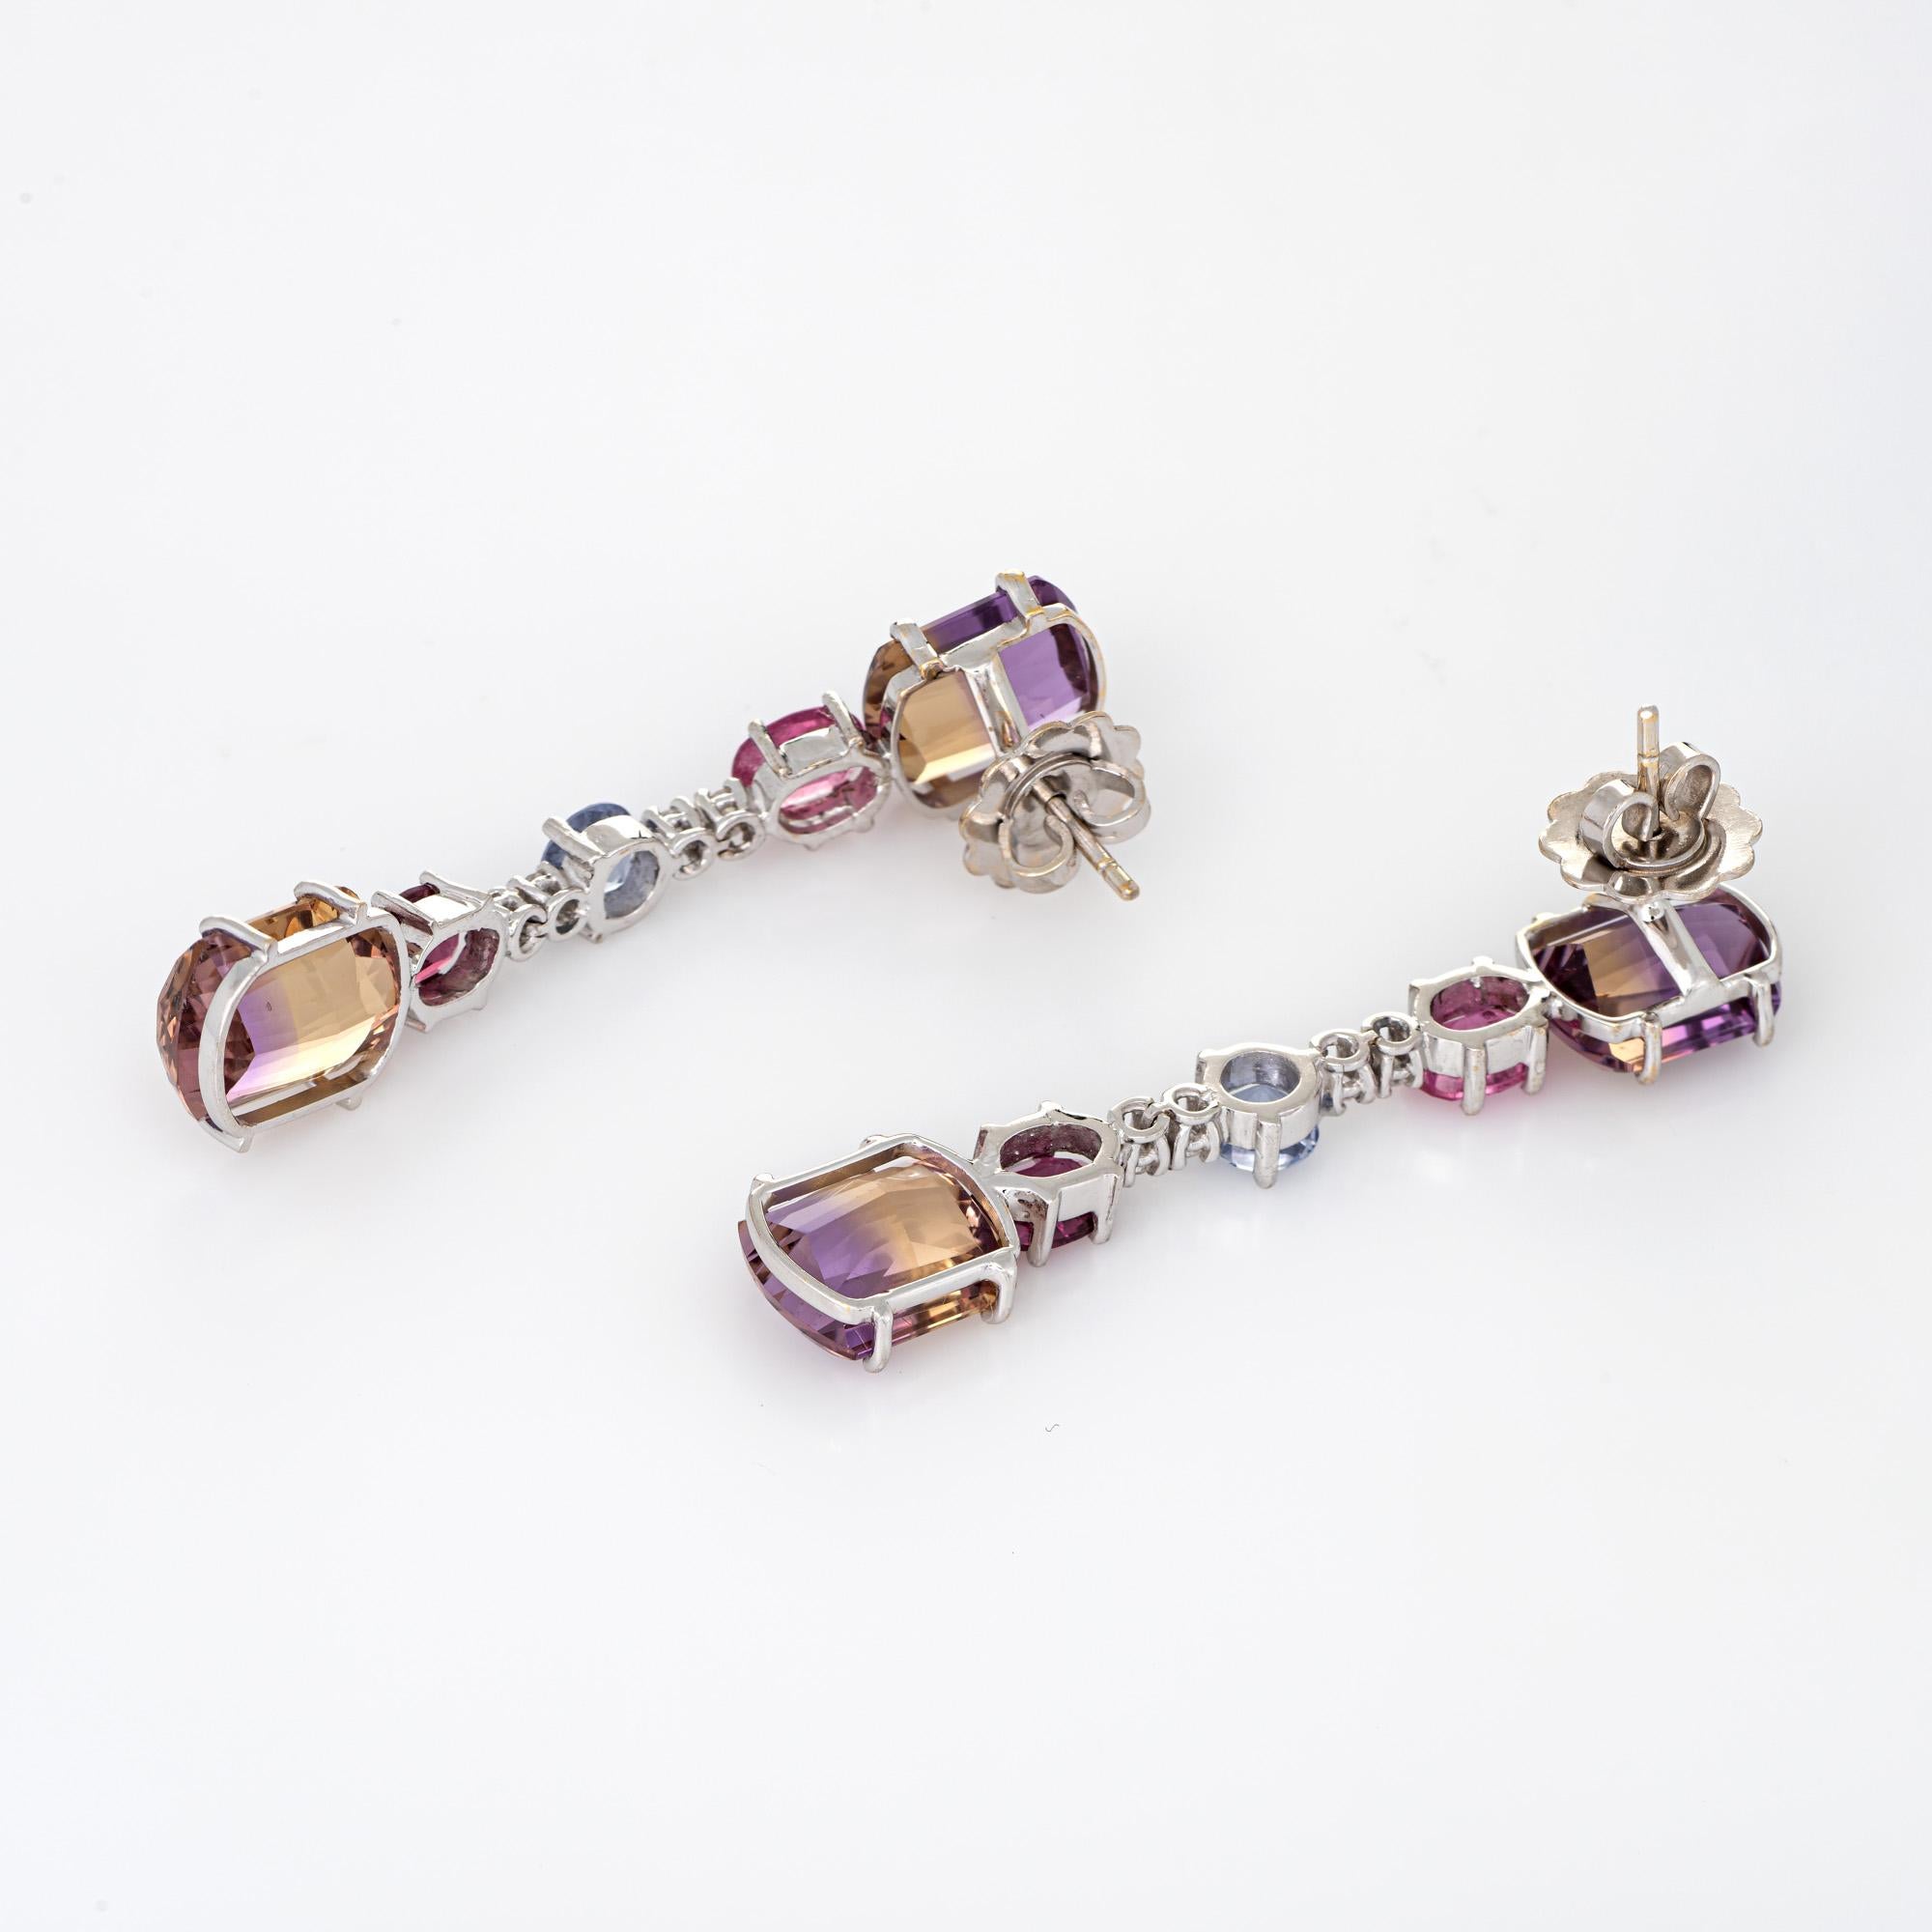 Elegant pair of multi gemstone drop earrings (ametrine, iolite, pink tourmaline and diamond) crafted in 18k white gold. 

Four ametrine measure 11mm x 9mm and total an estimated 20 carats (5 carats each). The pink tourmalines total an estimated 2